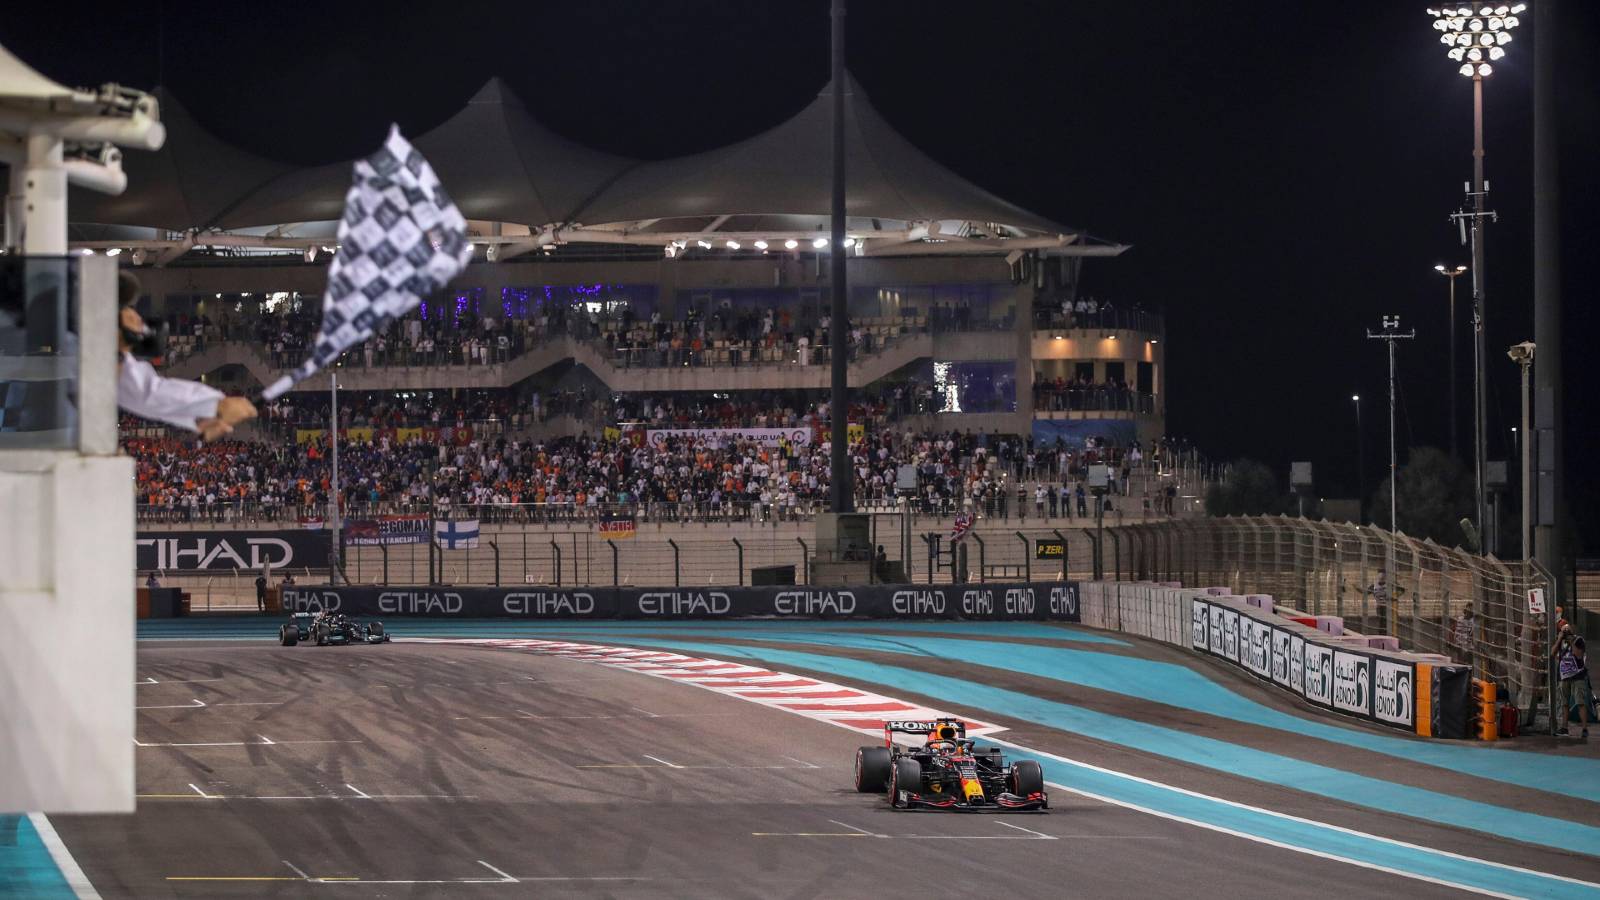 Max Verstappen takes the chequered flag in the Abu Dhabi GP. Yas Marina December 2021.